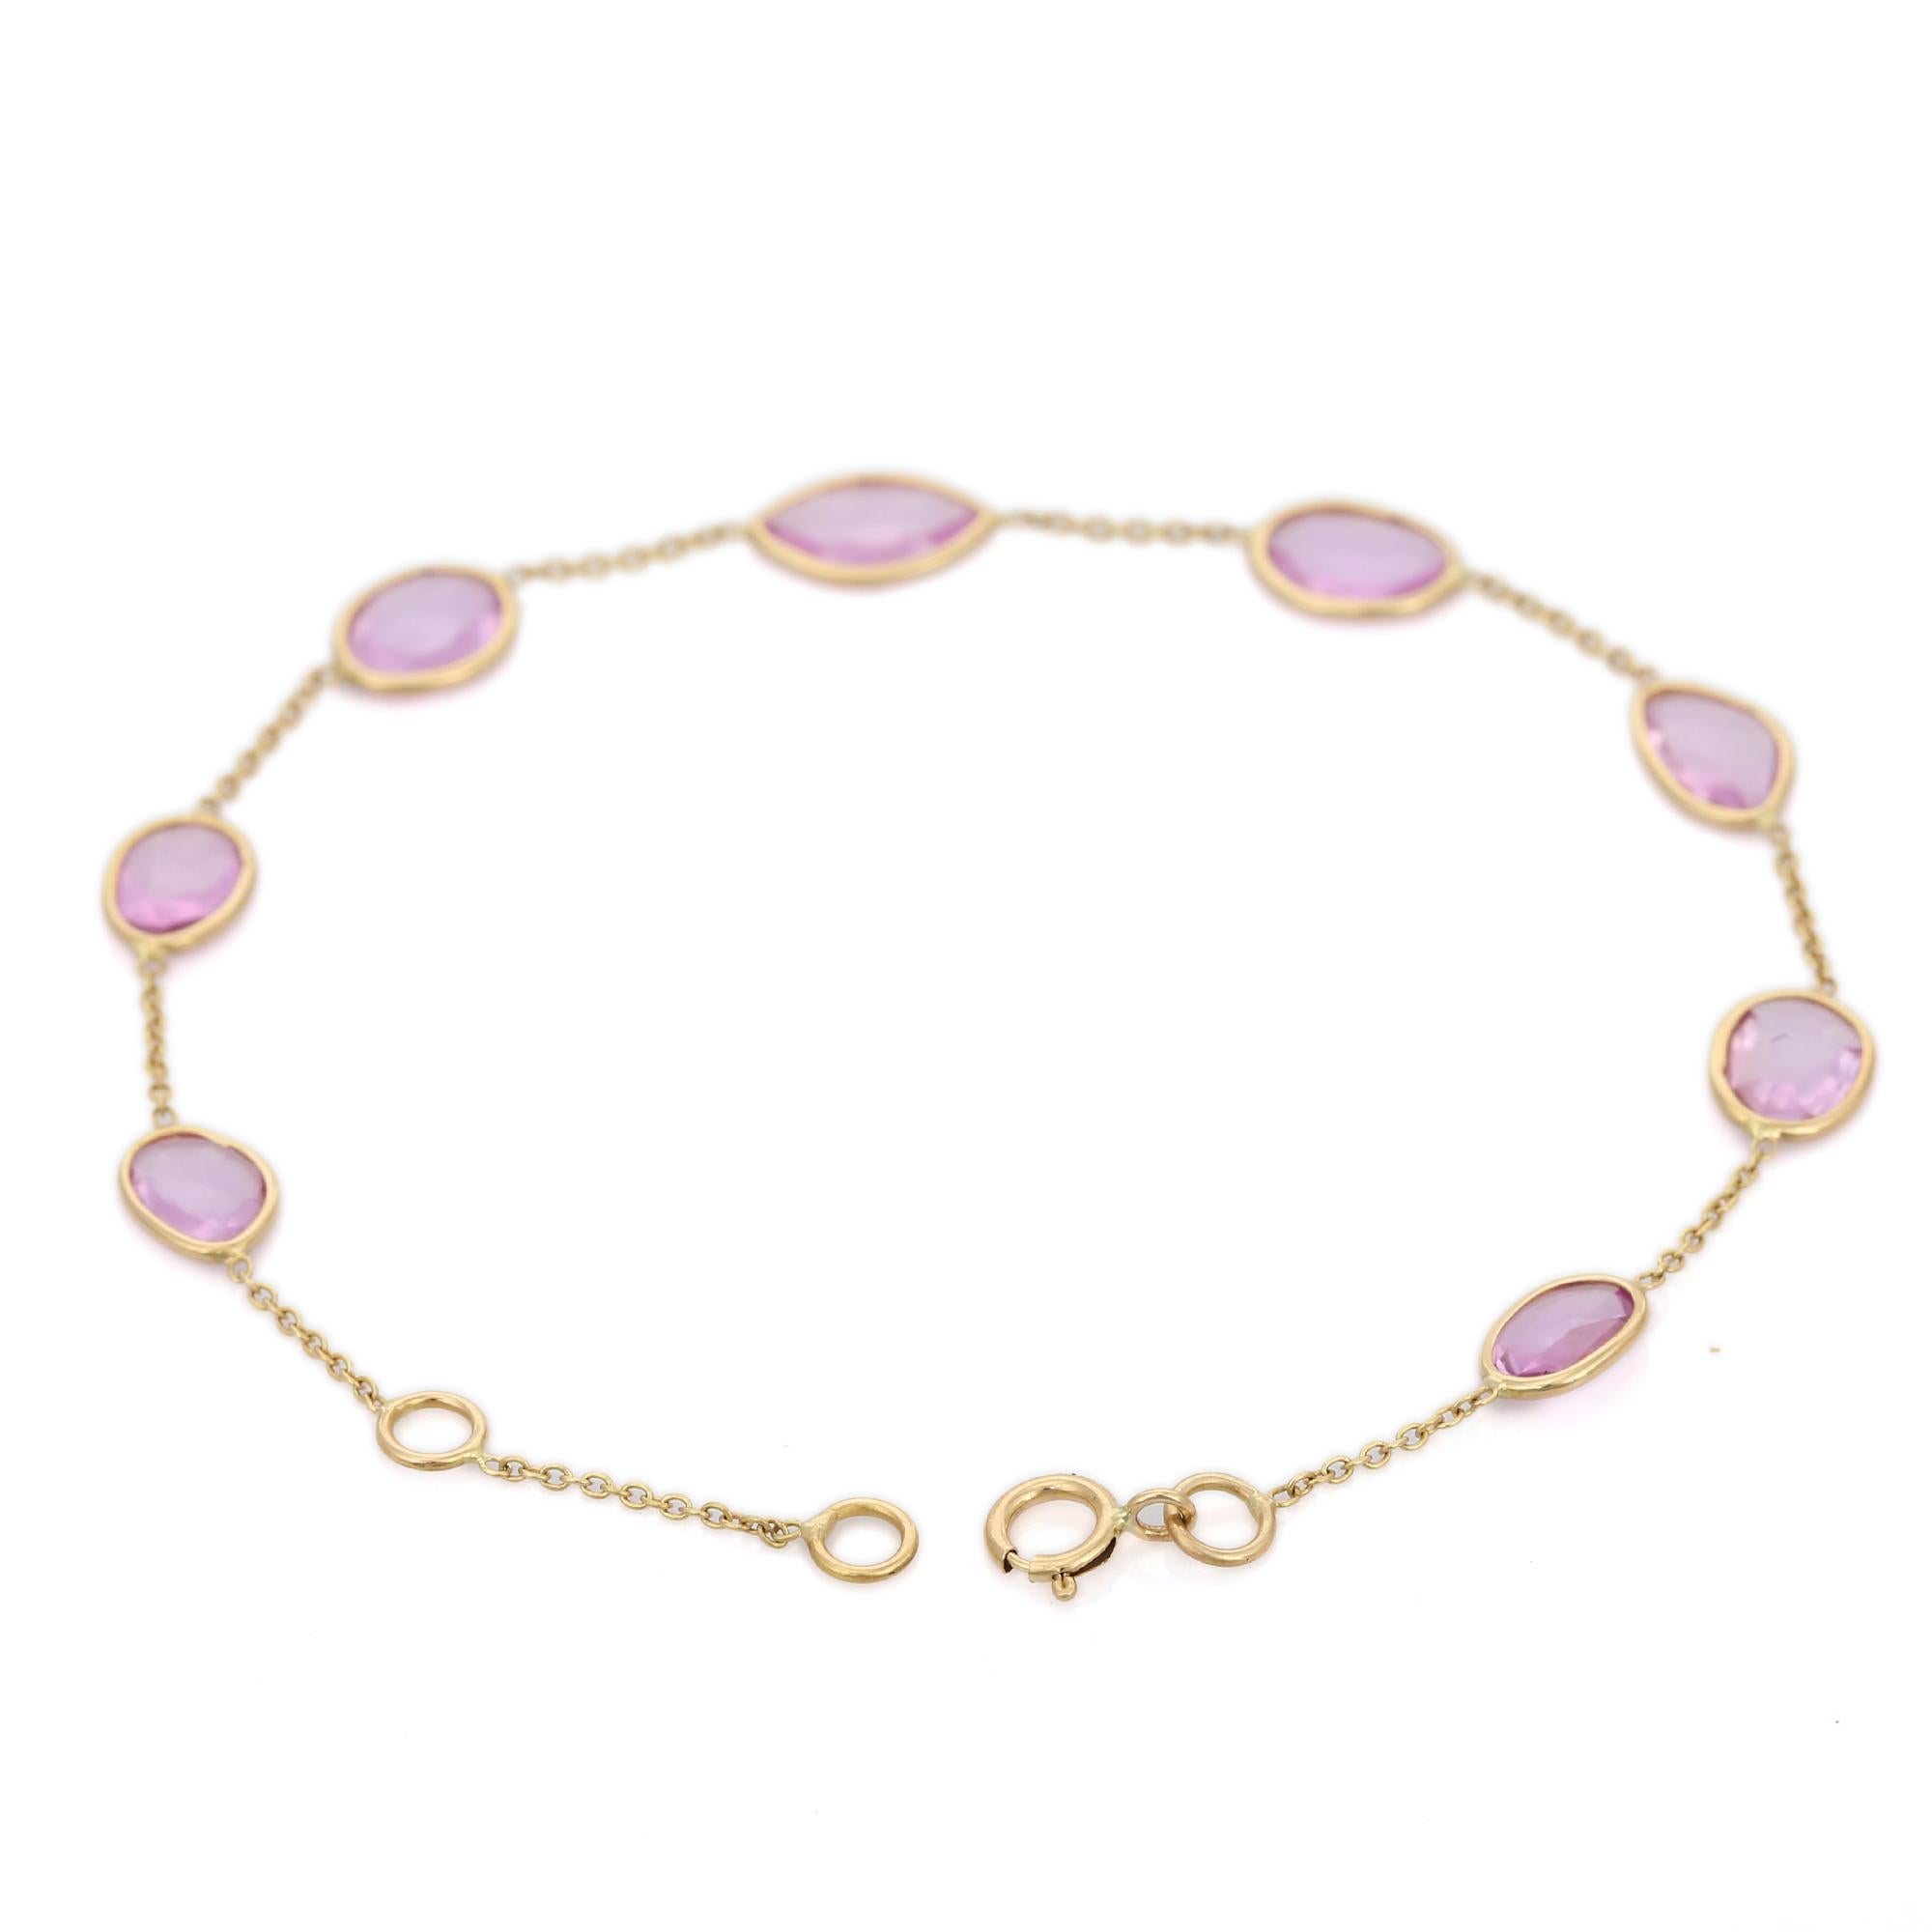 gold bracelet with pink stones